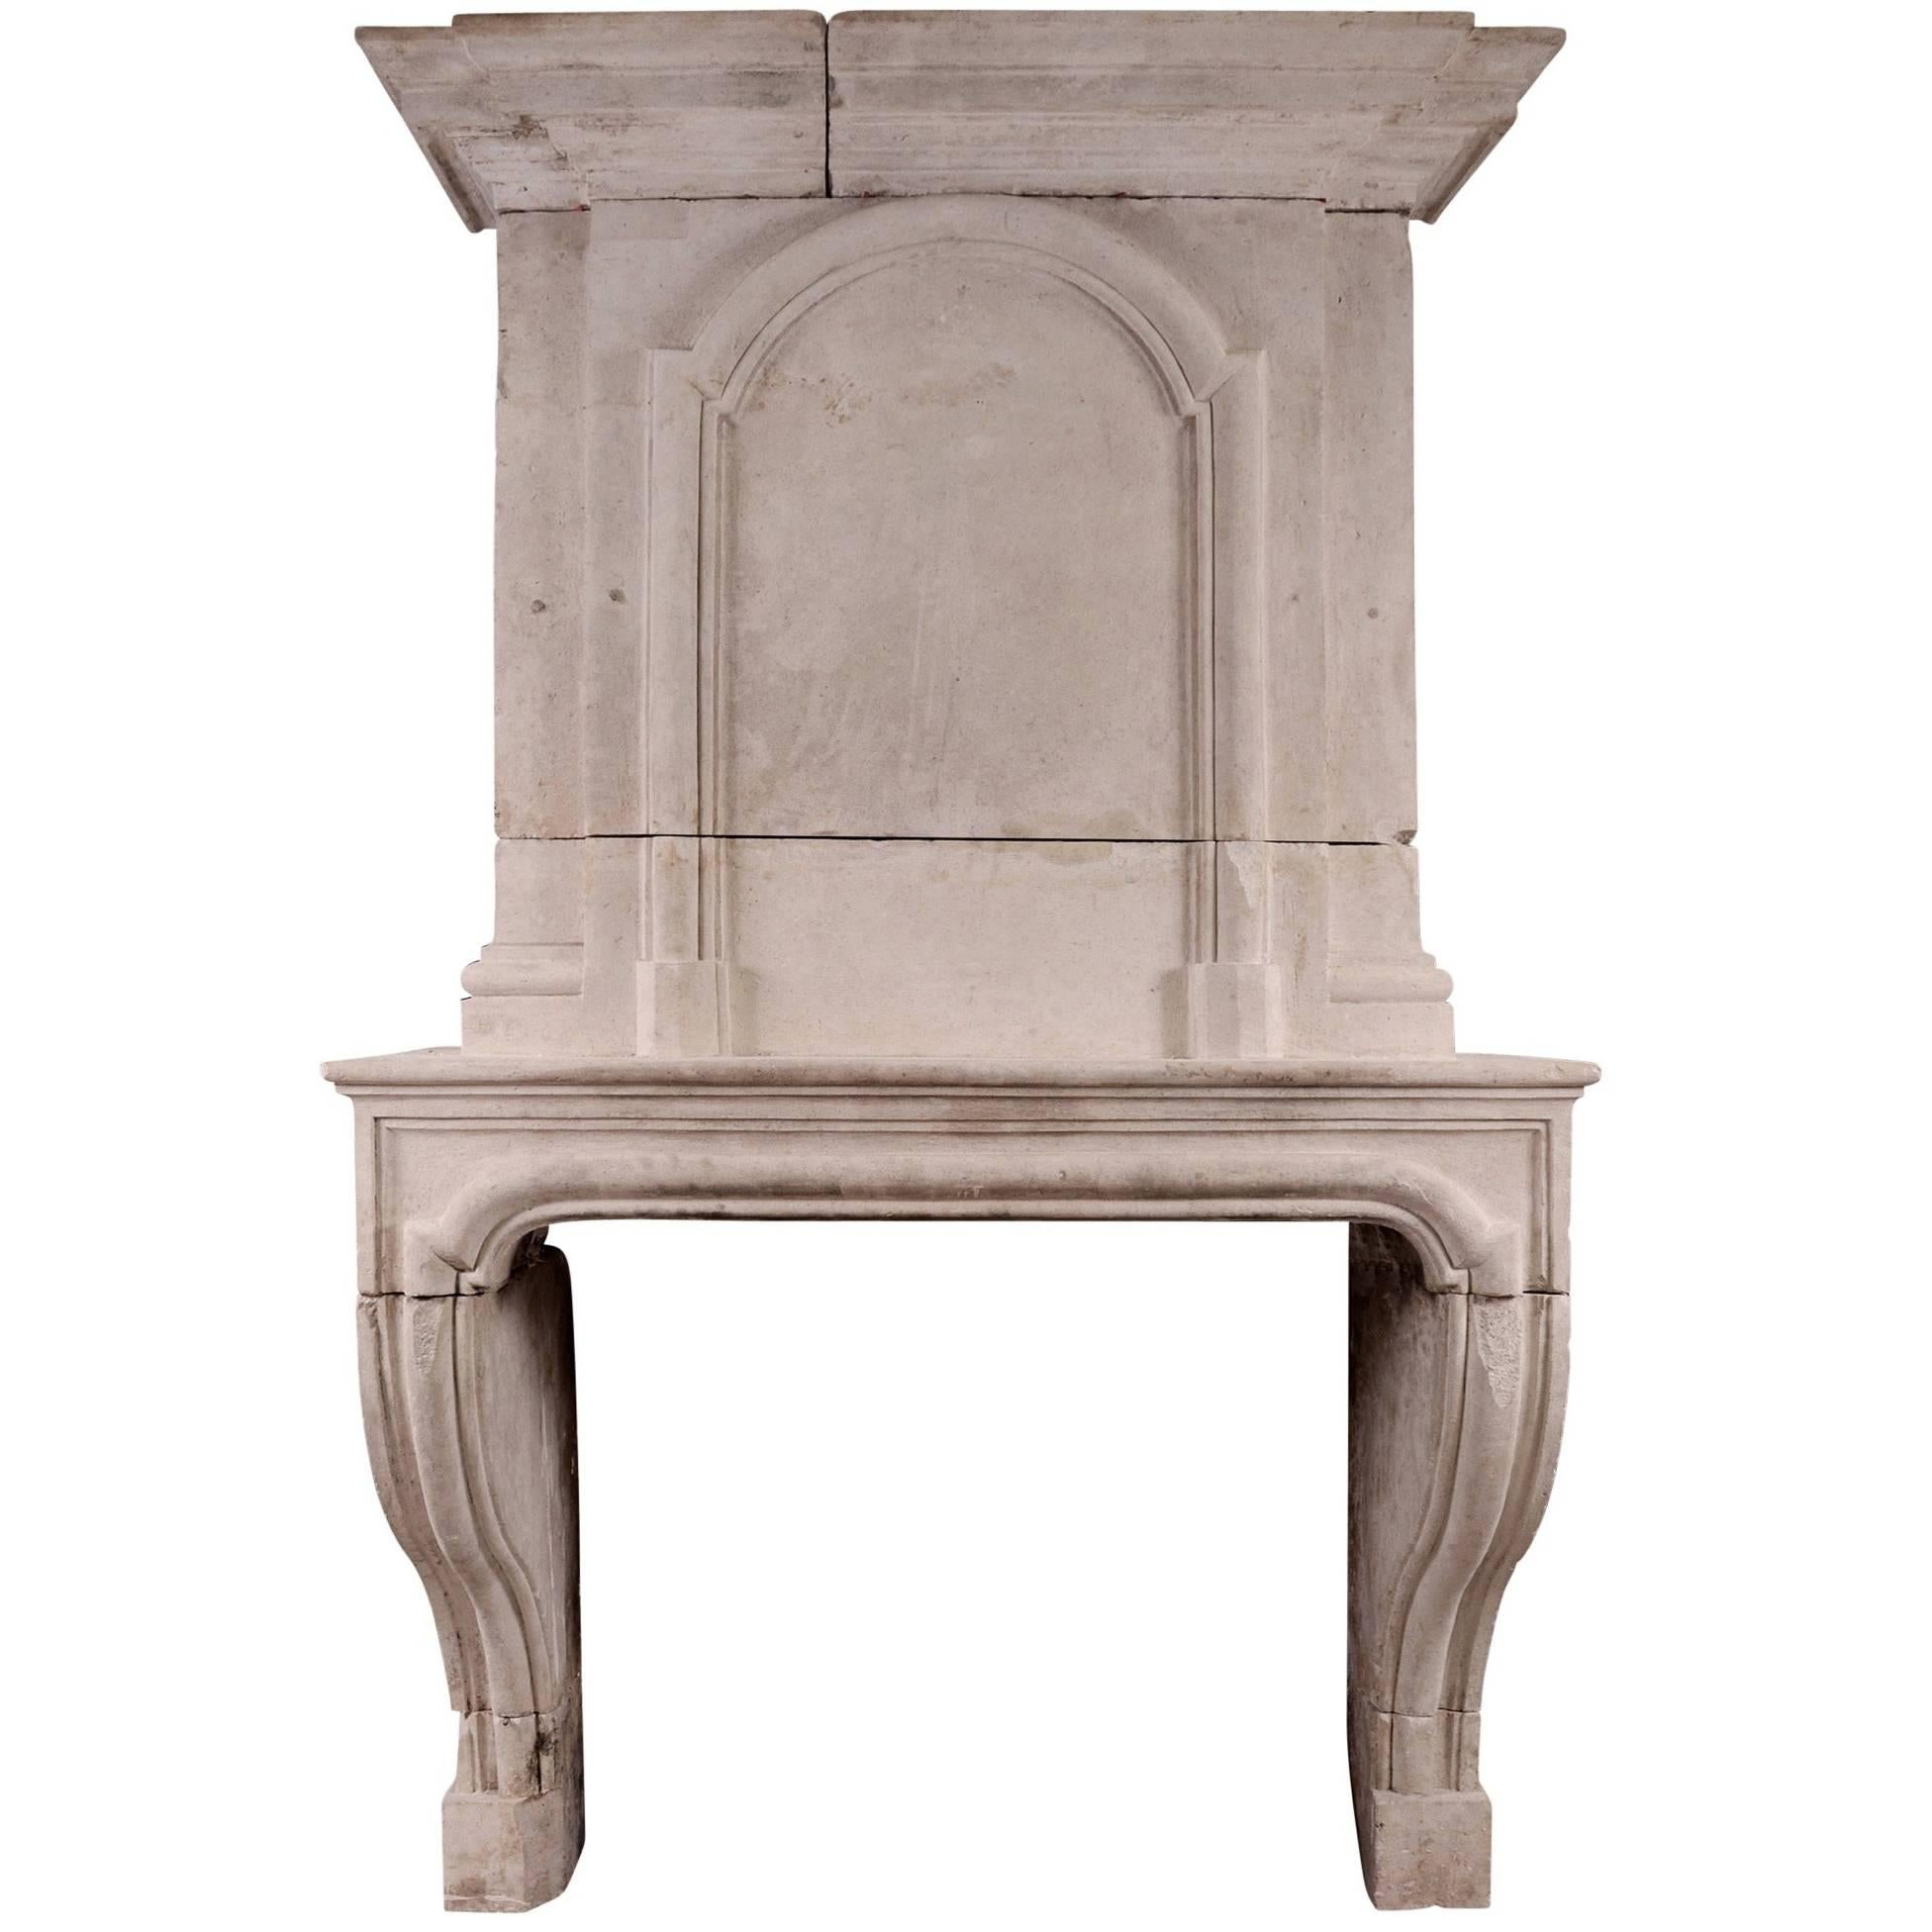 Early 18th Century Louis XIV Limestone Fireplace with Pannelled Trumeau